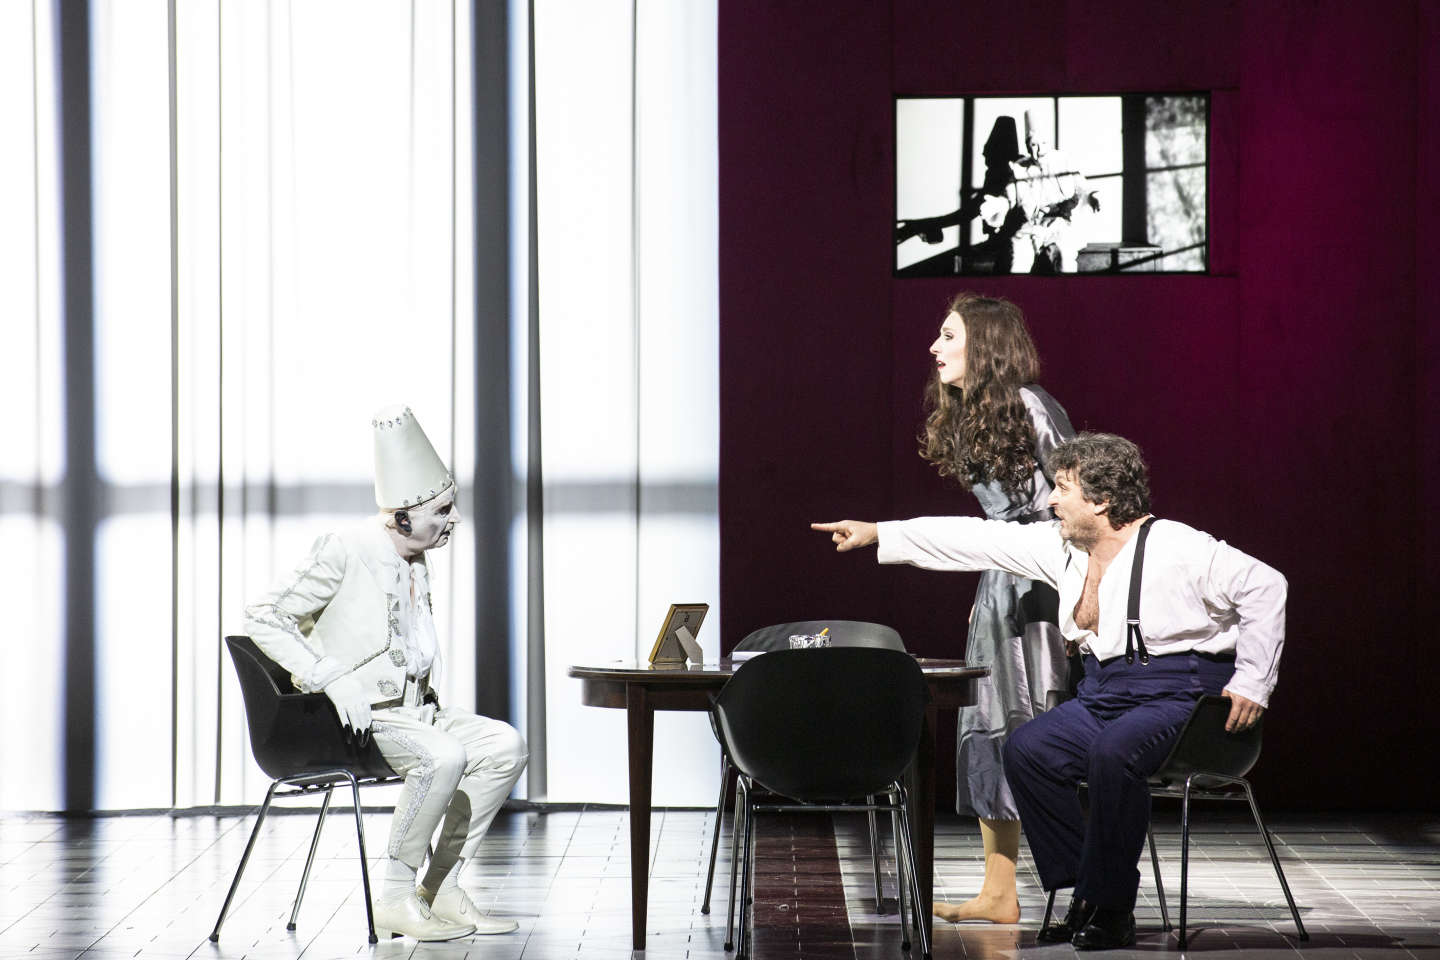 At the Opéra Bastille, Ludovic Tézier makes Hamlet a dark and inhabited clown